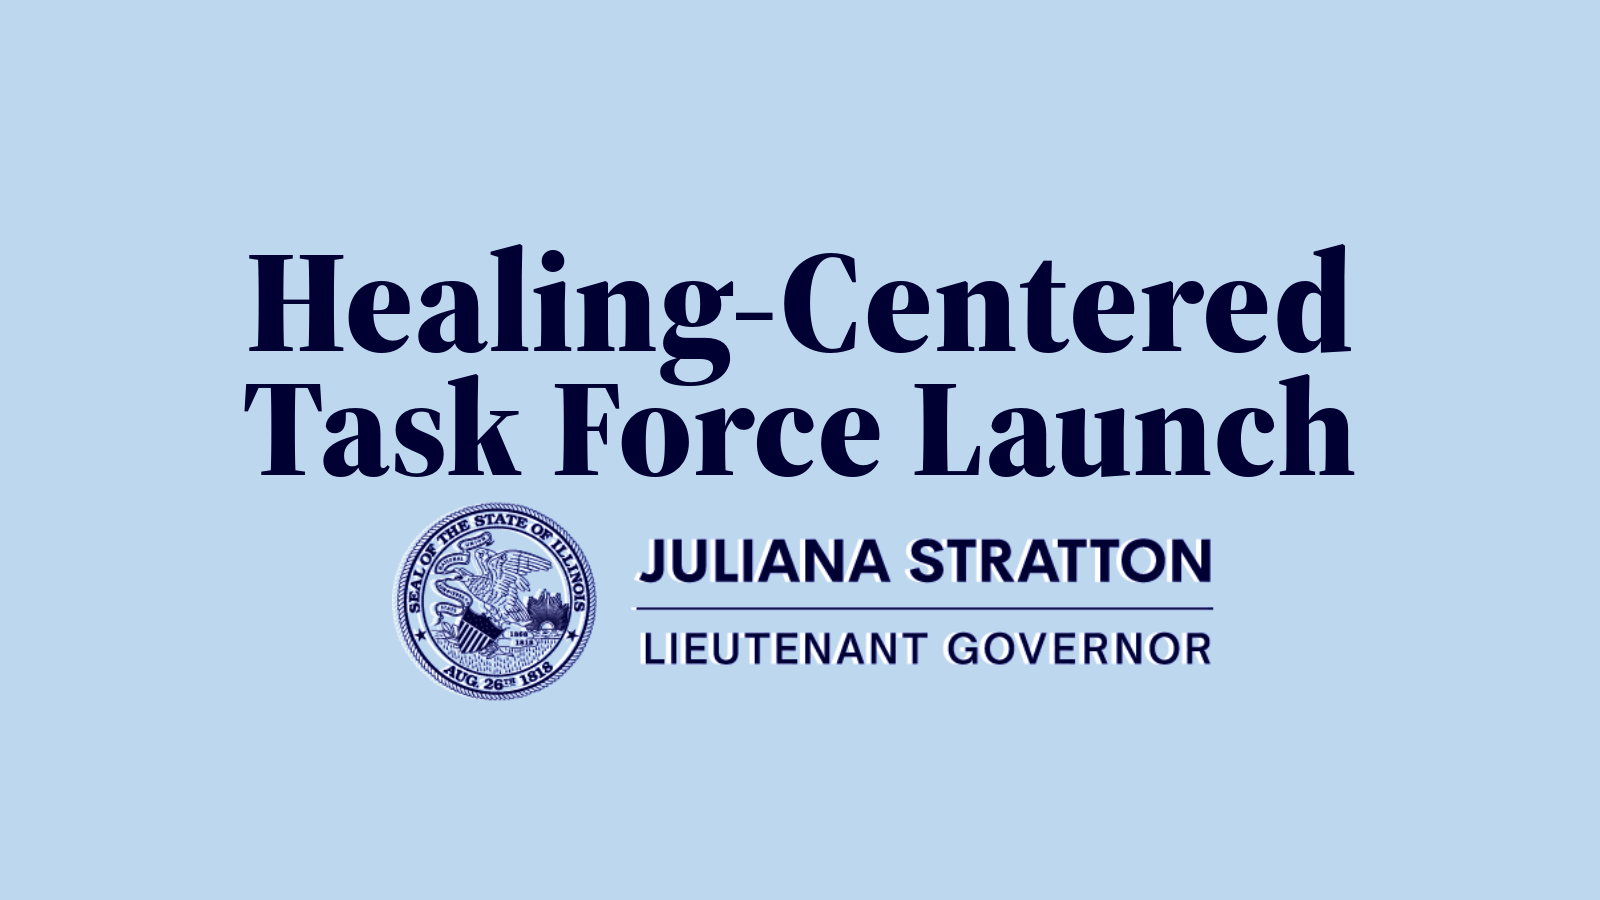 Text-based image that says 'Healing-Centered Task Force Launch' with seal of Illinois Lt. Governor Juliana Stratton and heading